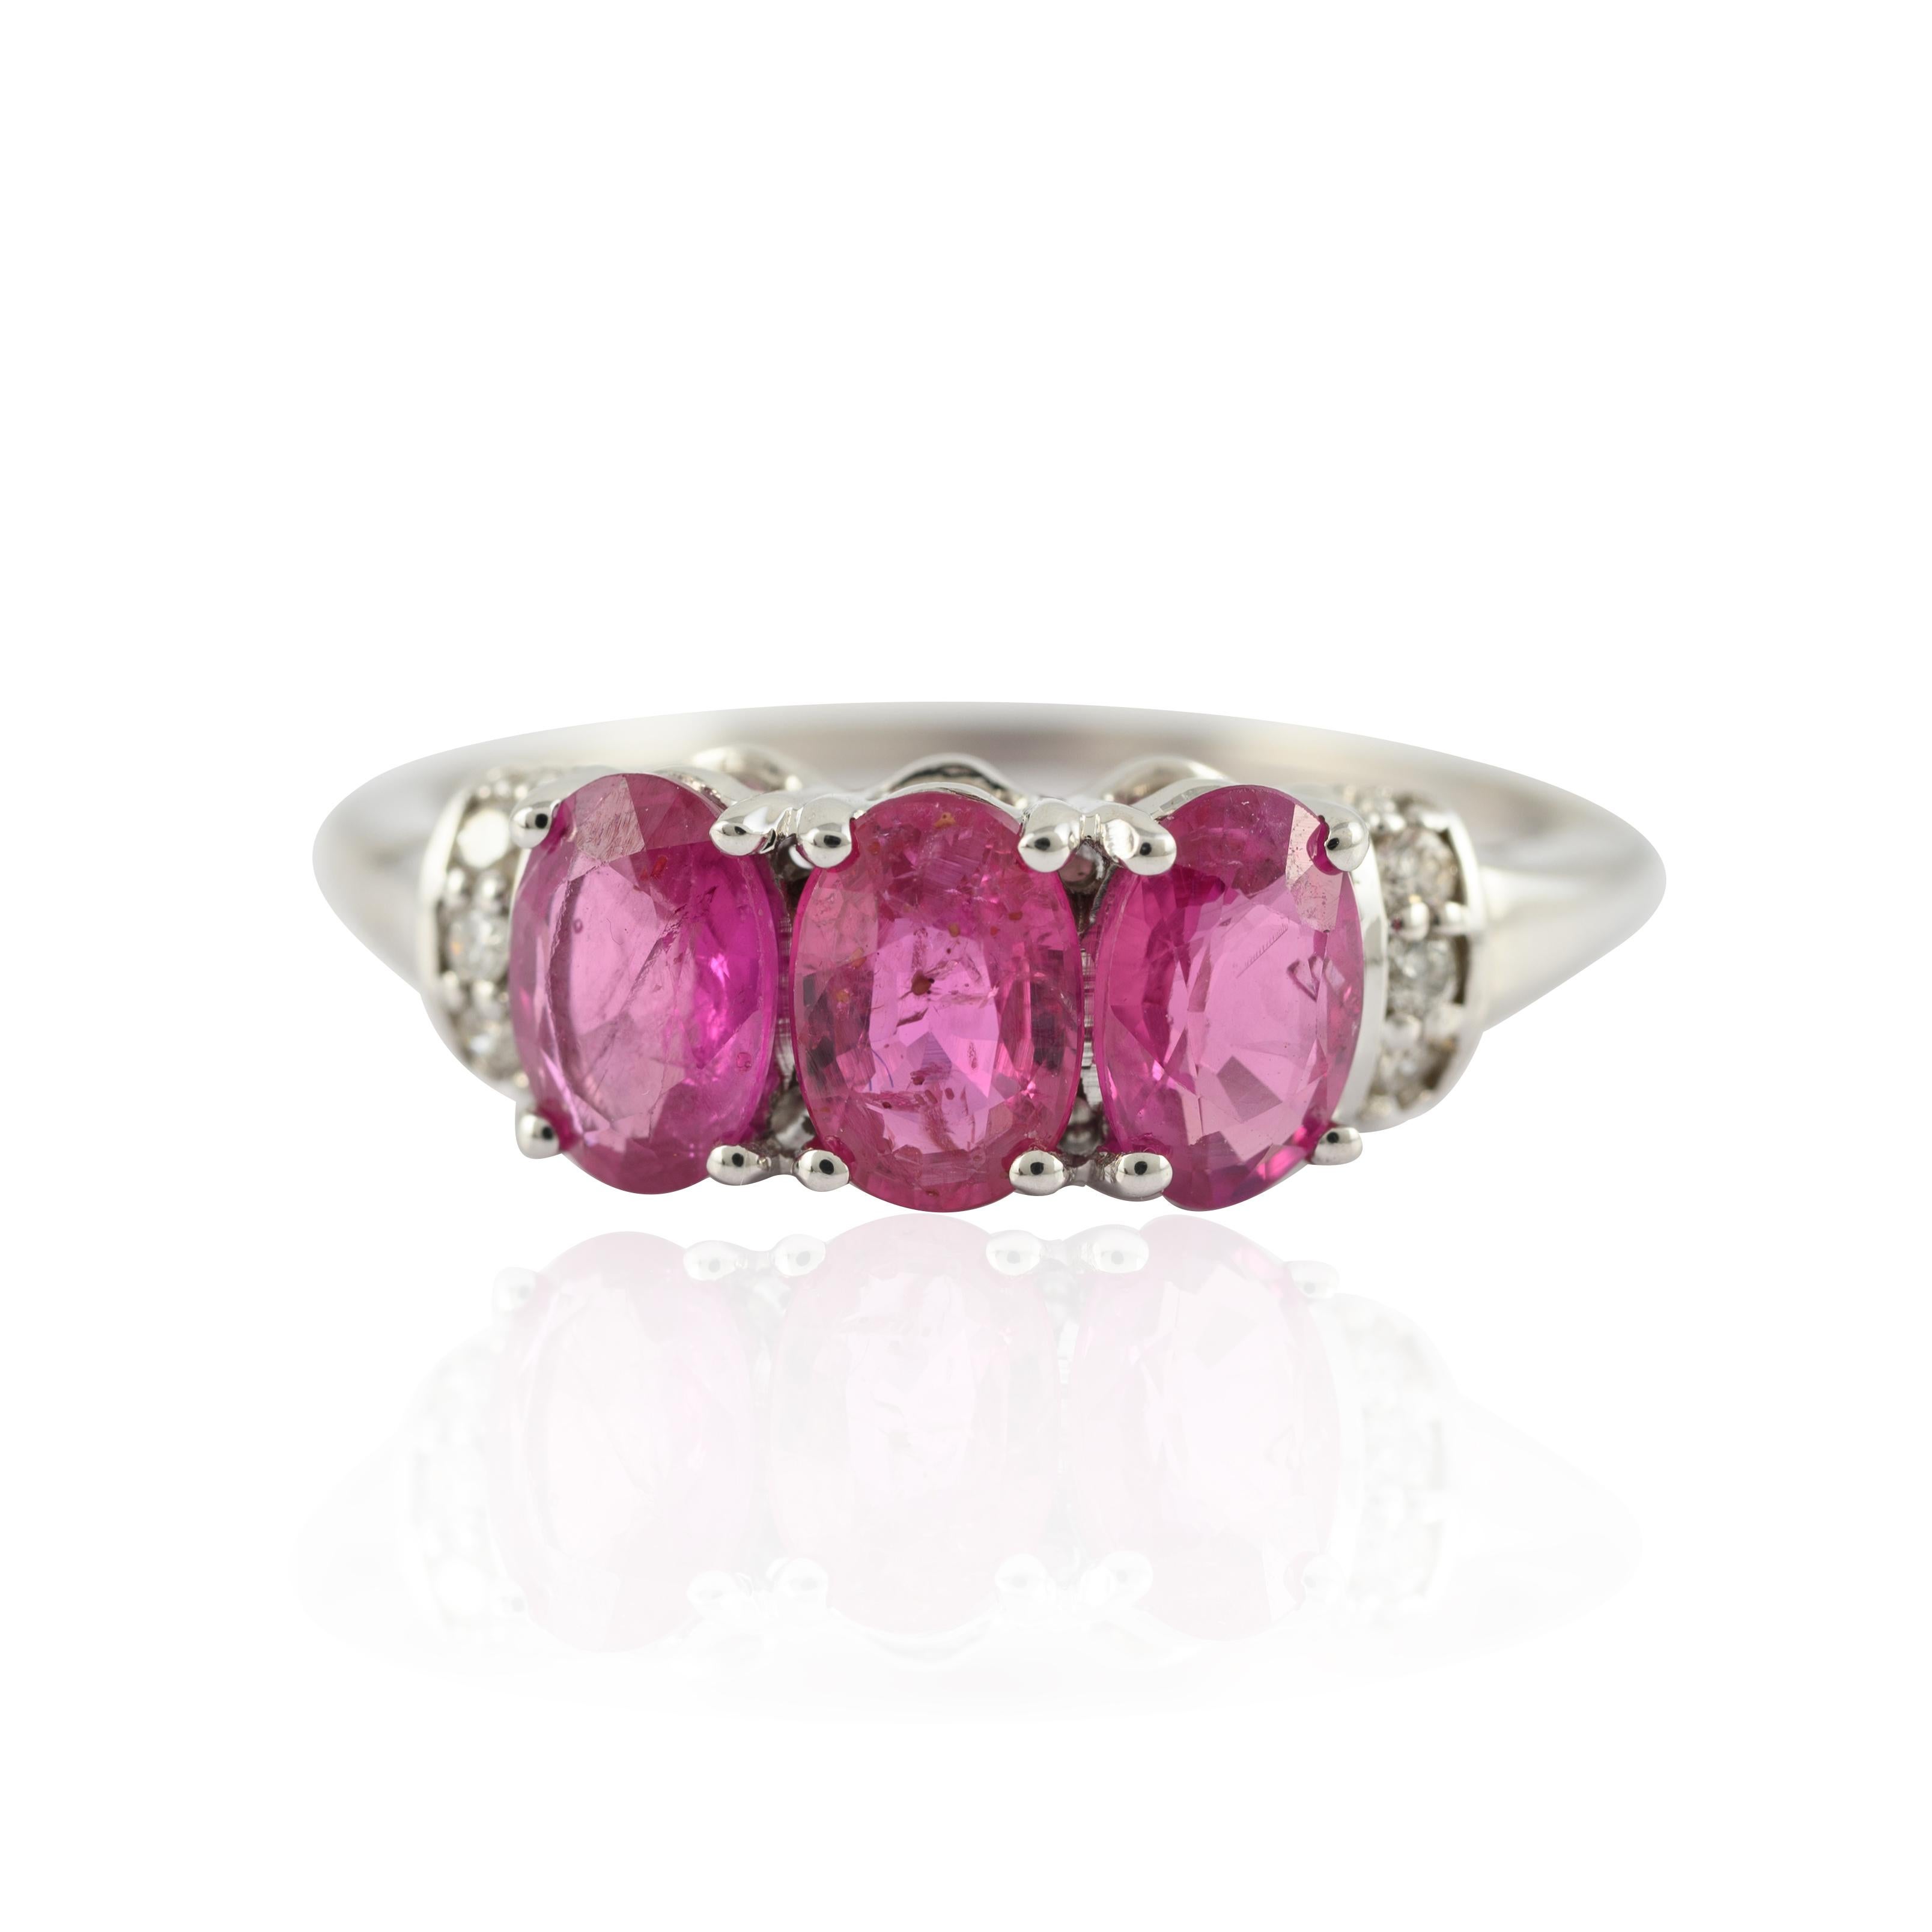 For Sale:  14k Solid White Gold Natural Oval Ruby Three-Stone Ring with Diamonds Accent 3